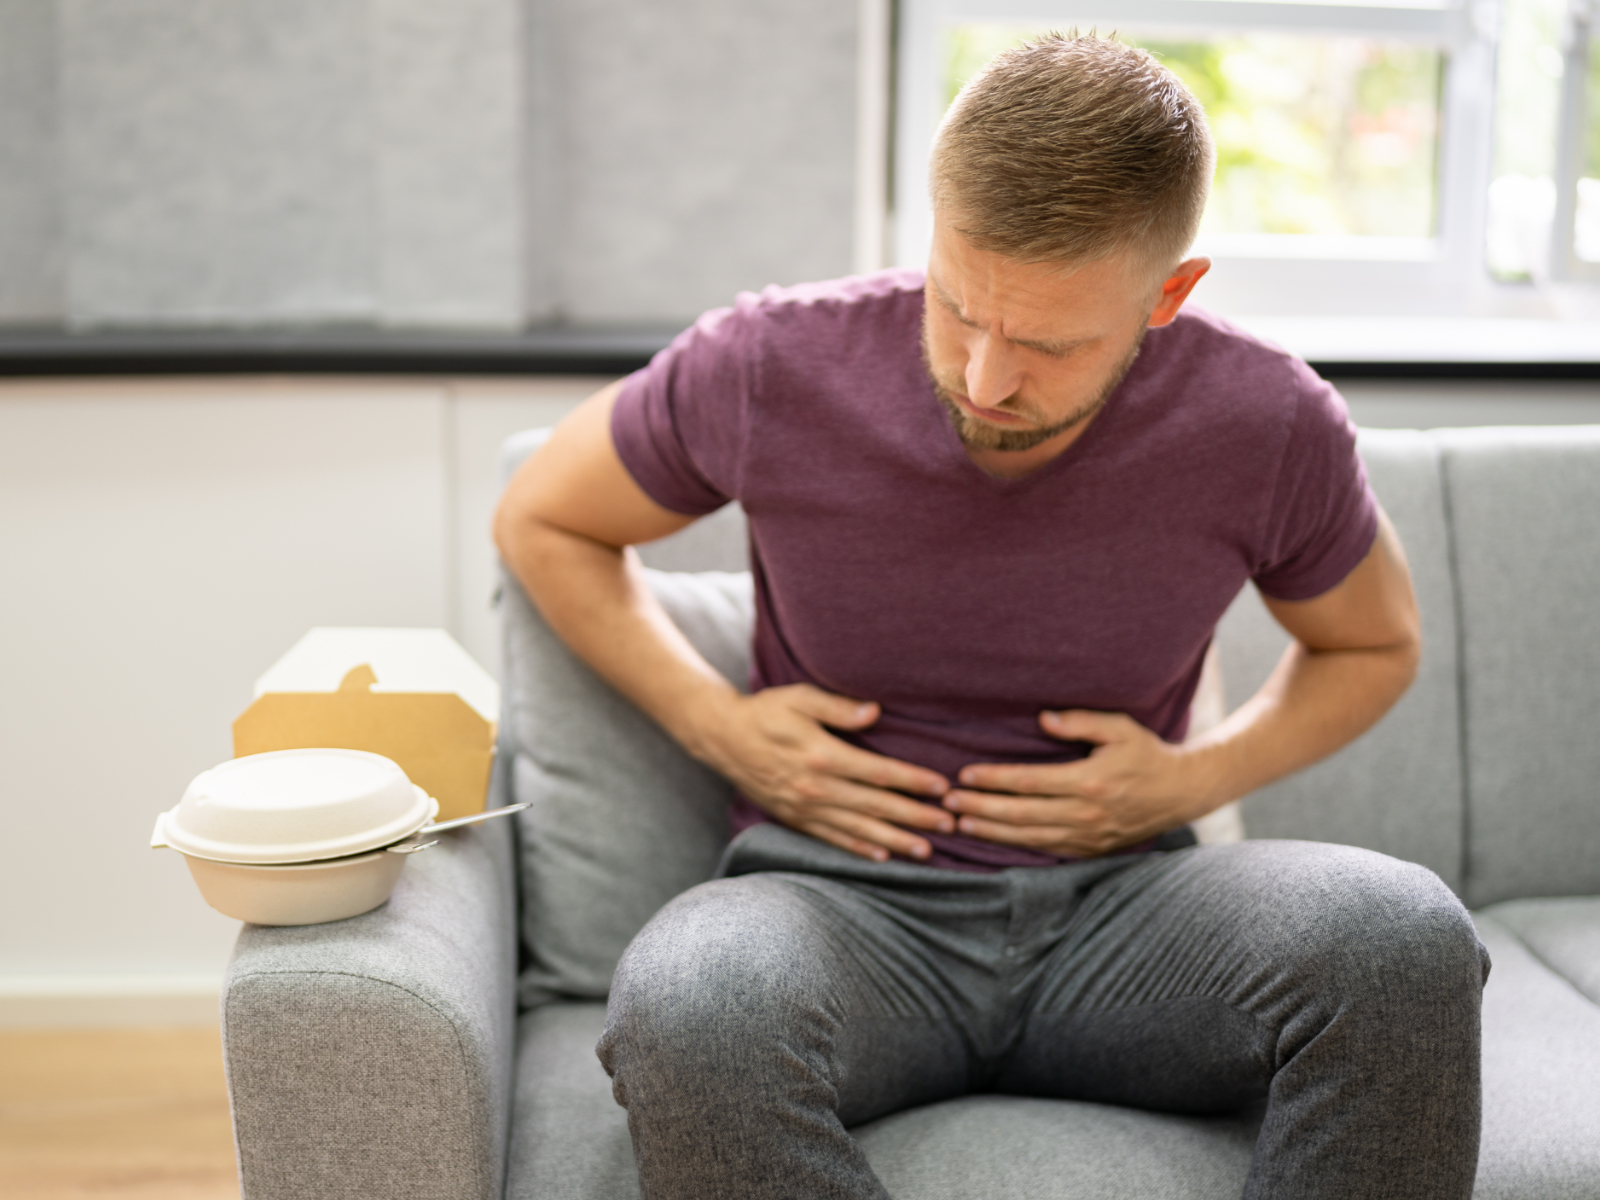 man holding an upset stomach after eating spicy fast food